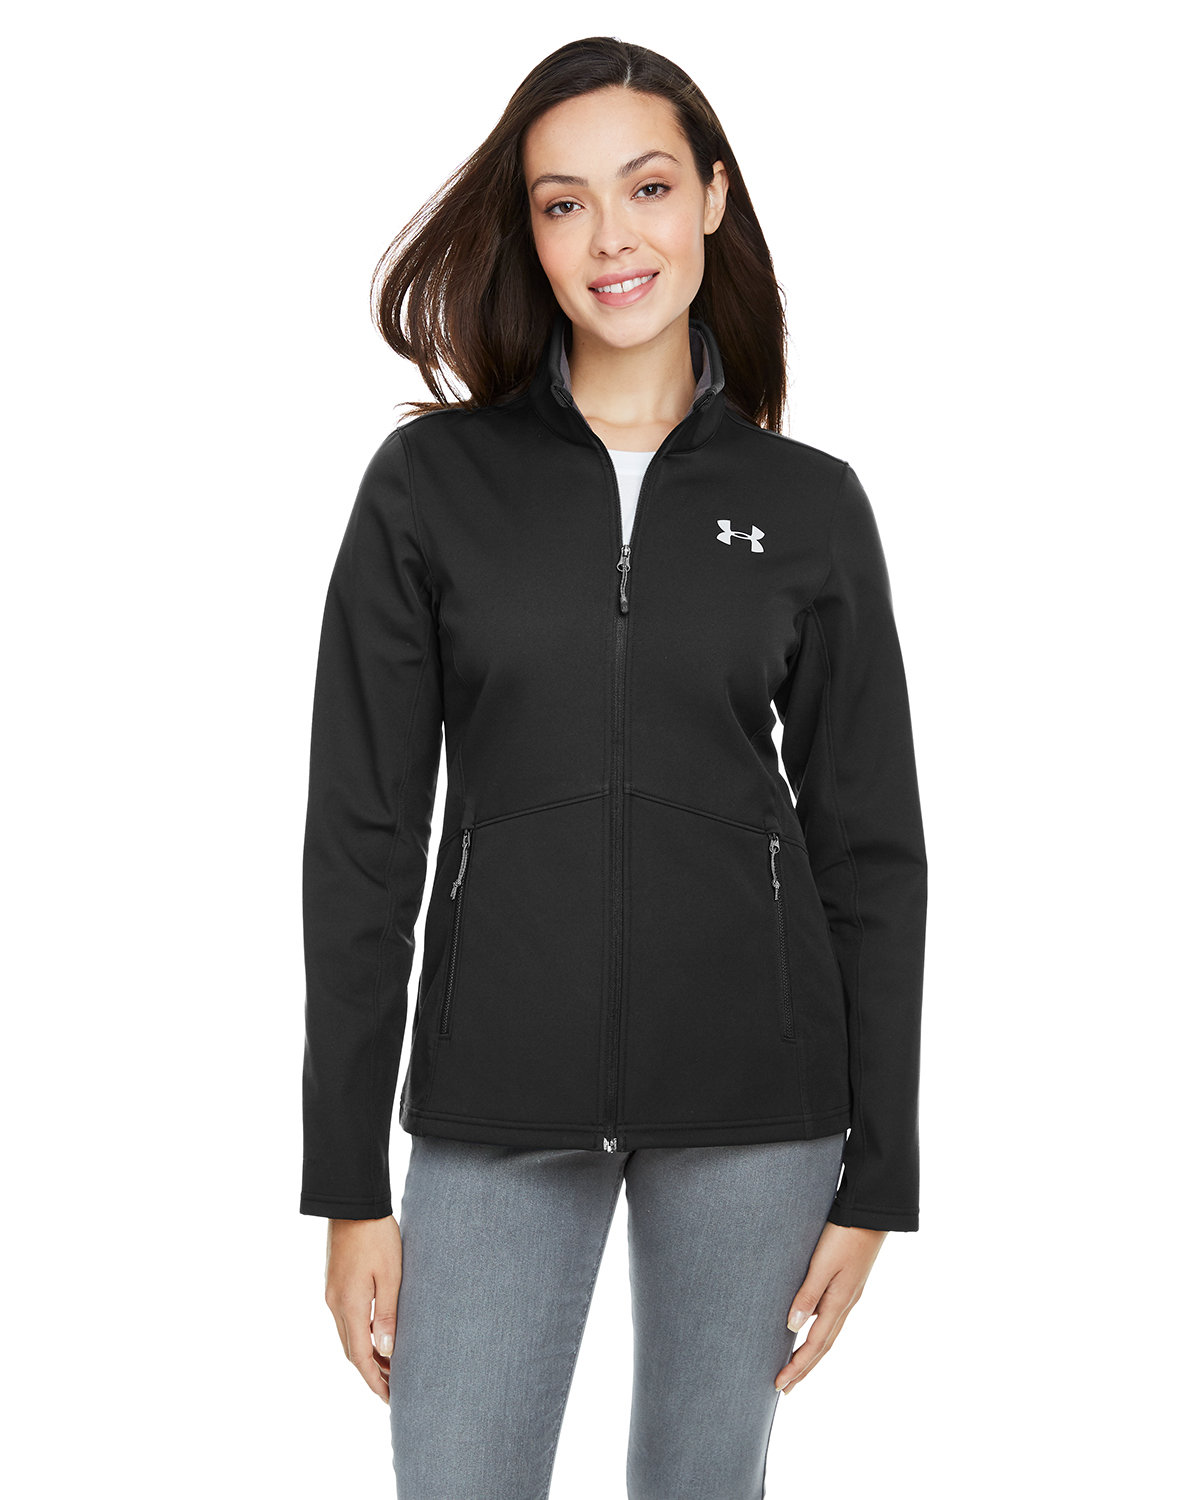 Under Armour Mens Rival Jacket 1326761